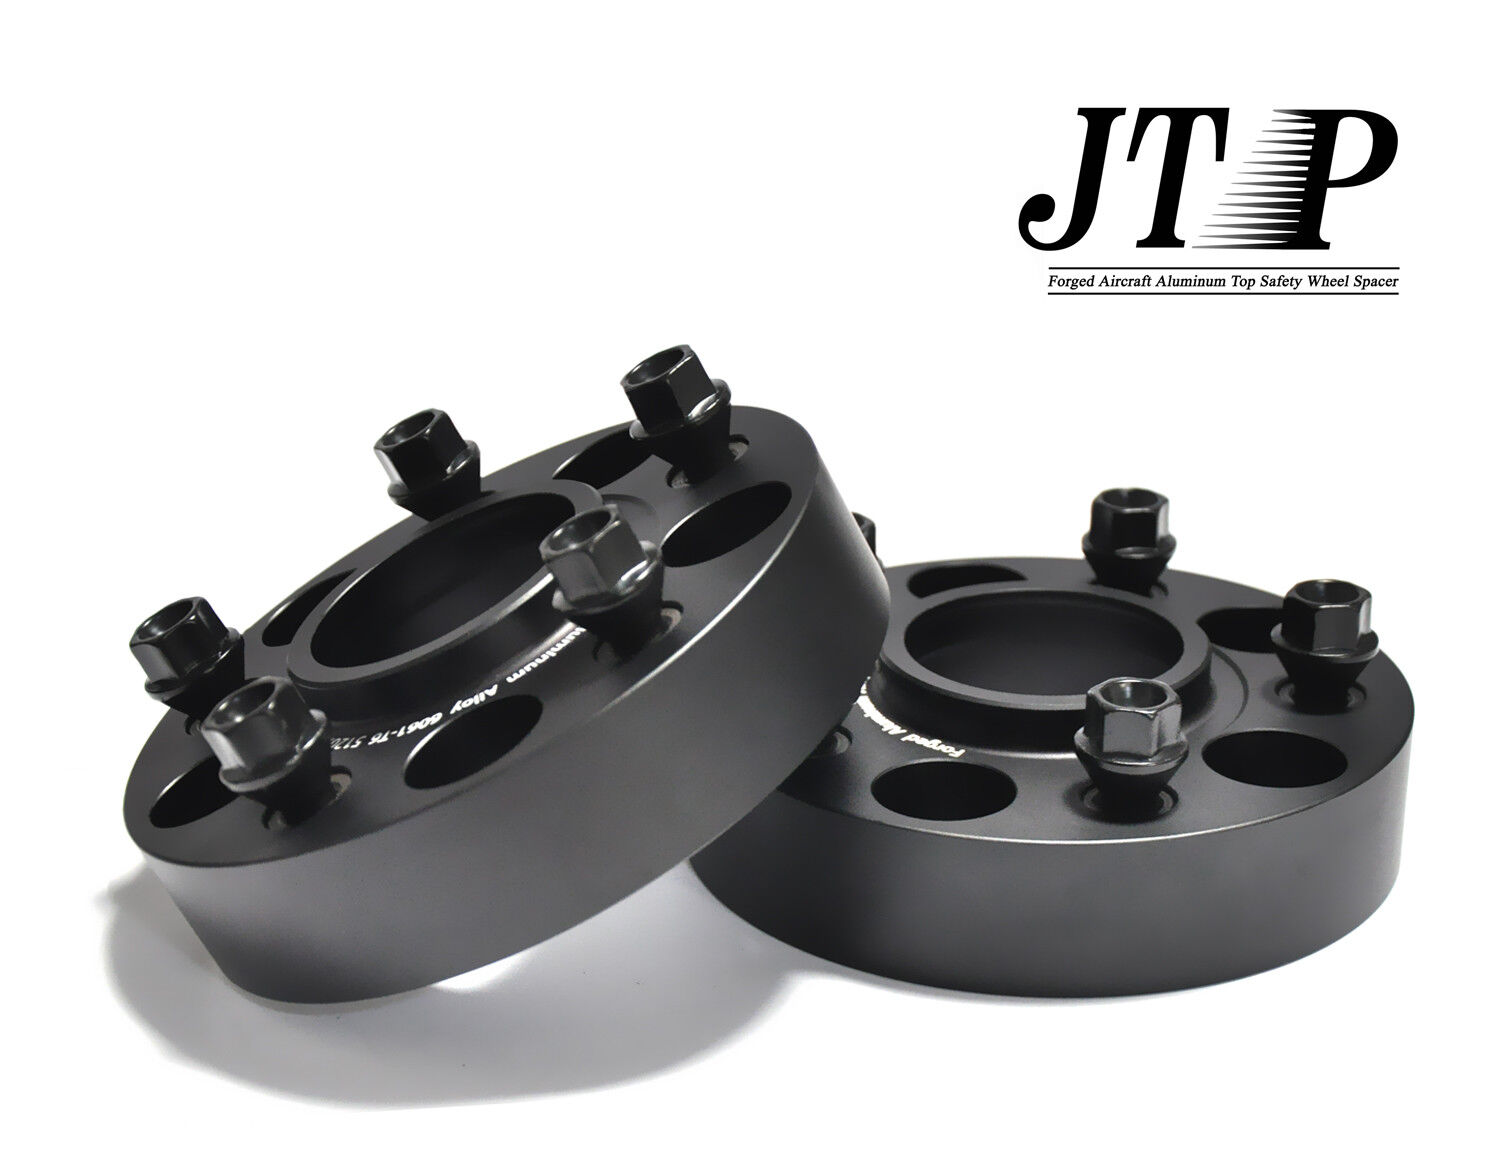 2x 30mm Forged Safe Wheel Spacers for Porsche 911 Carrera 4,4S,GT2,GT3,MK67,8,9